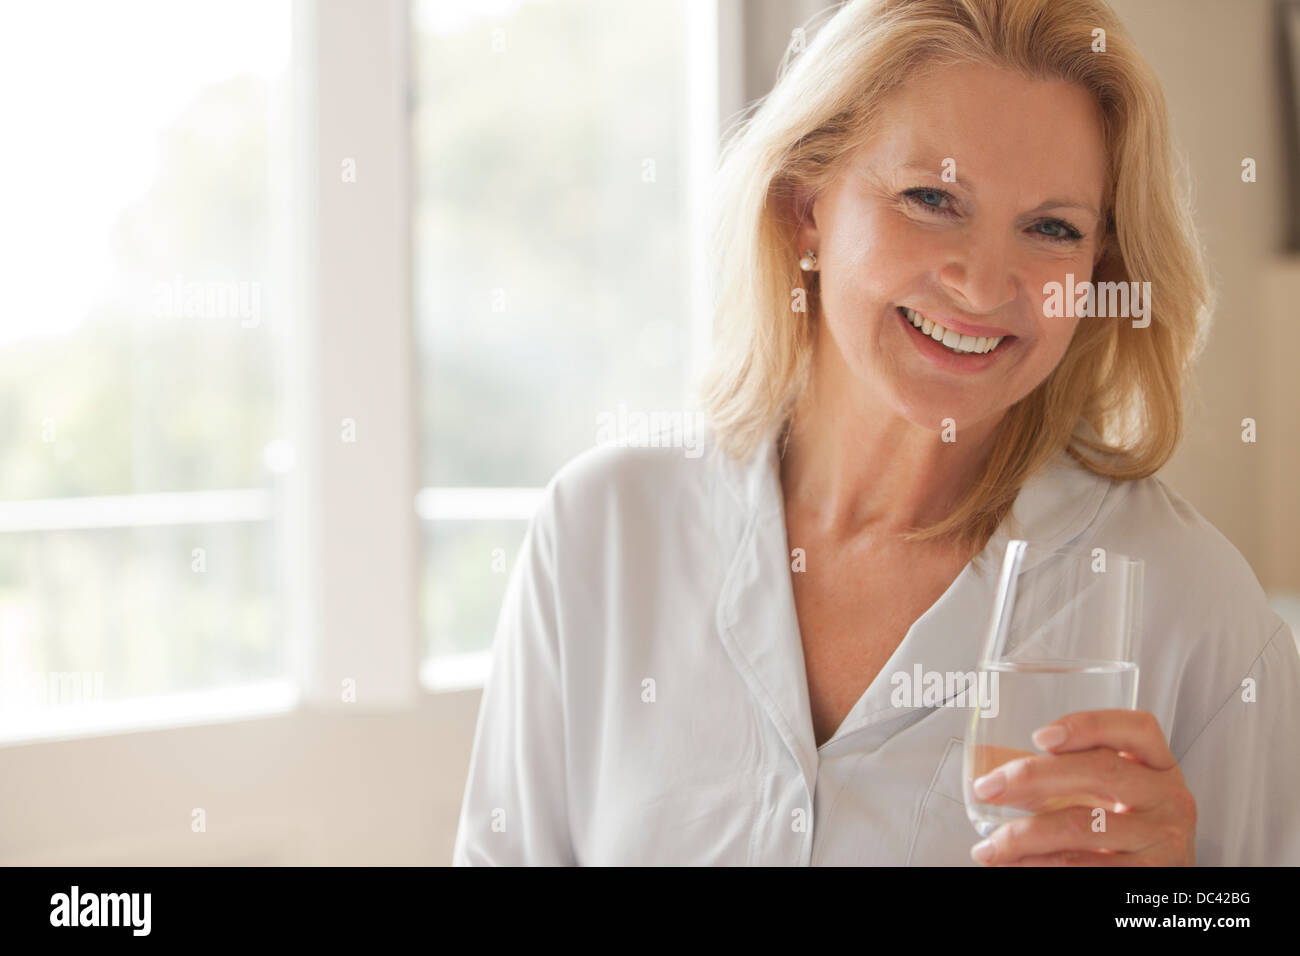 Portrait of smiling woman drinking glass of water Banque D'Images